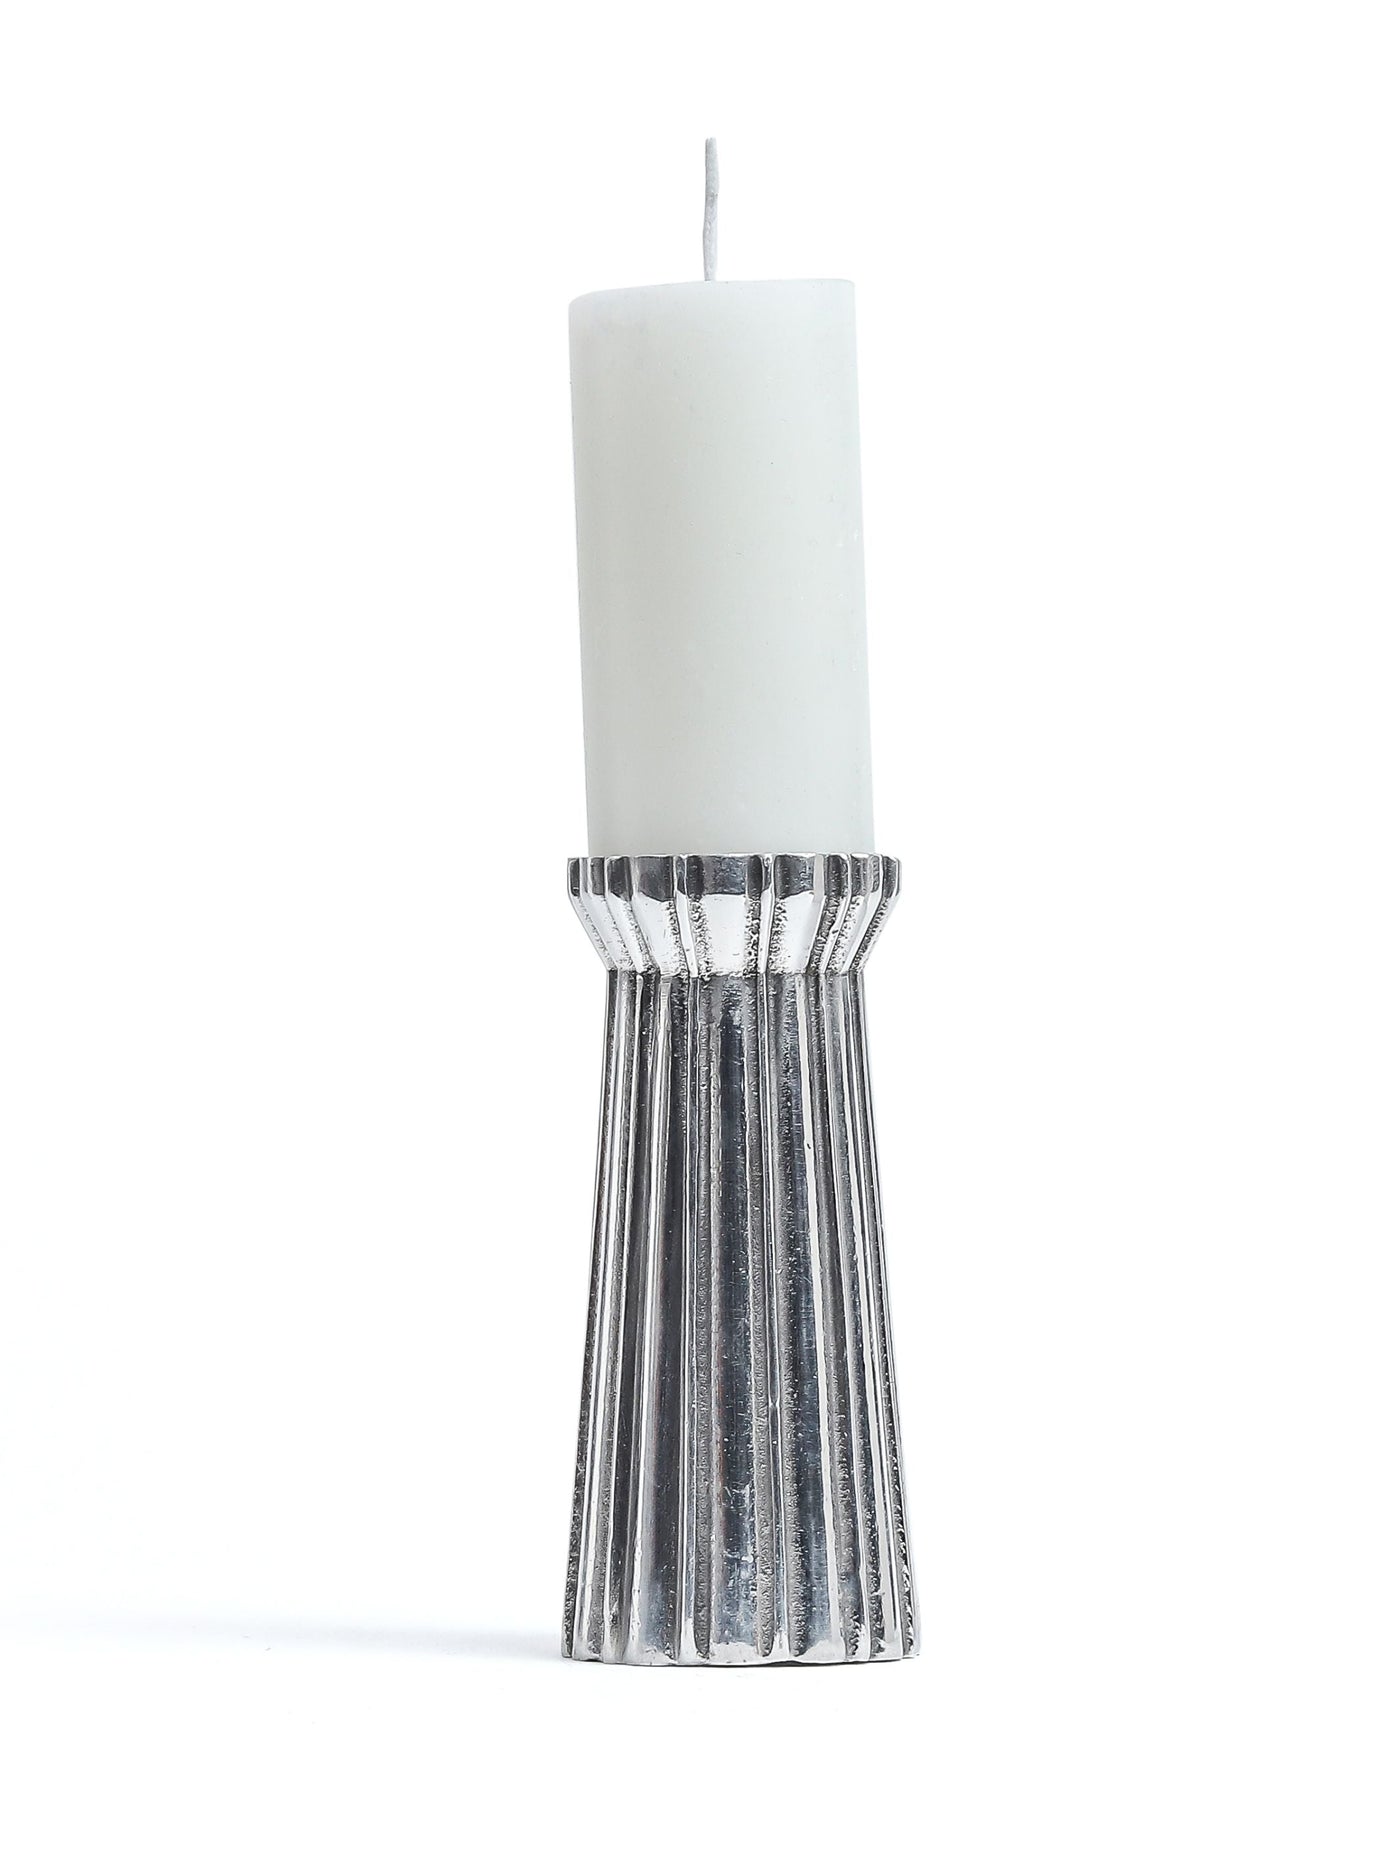 Qutub Silver Candle Stand